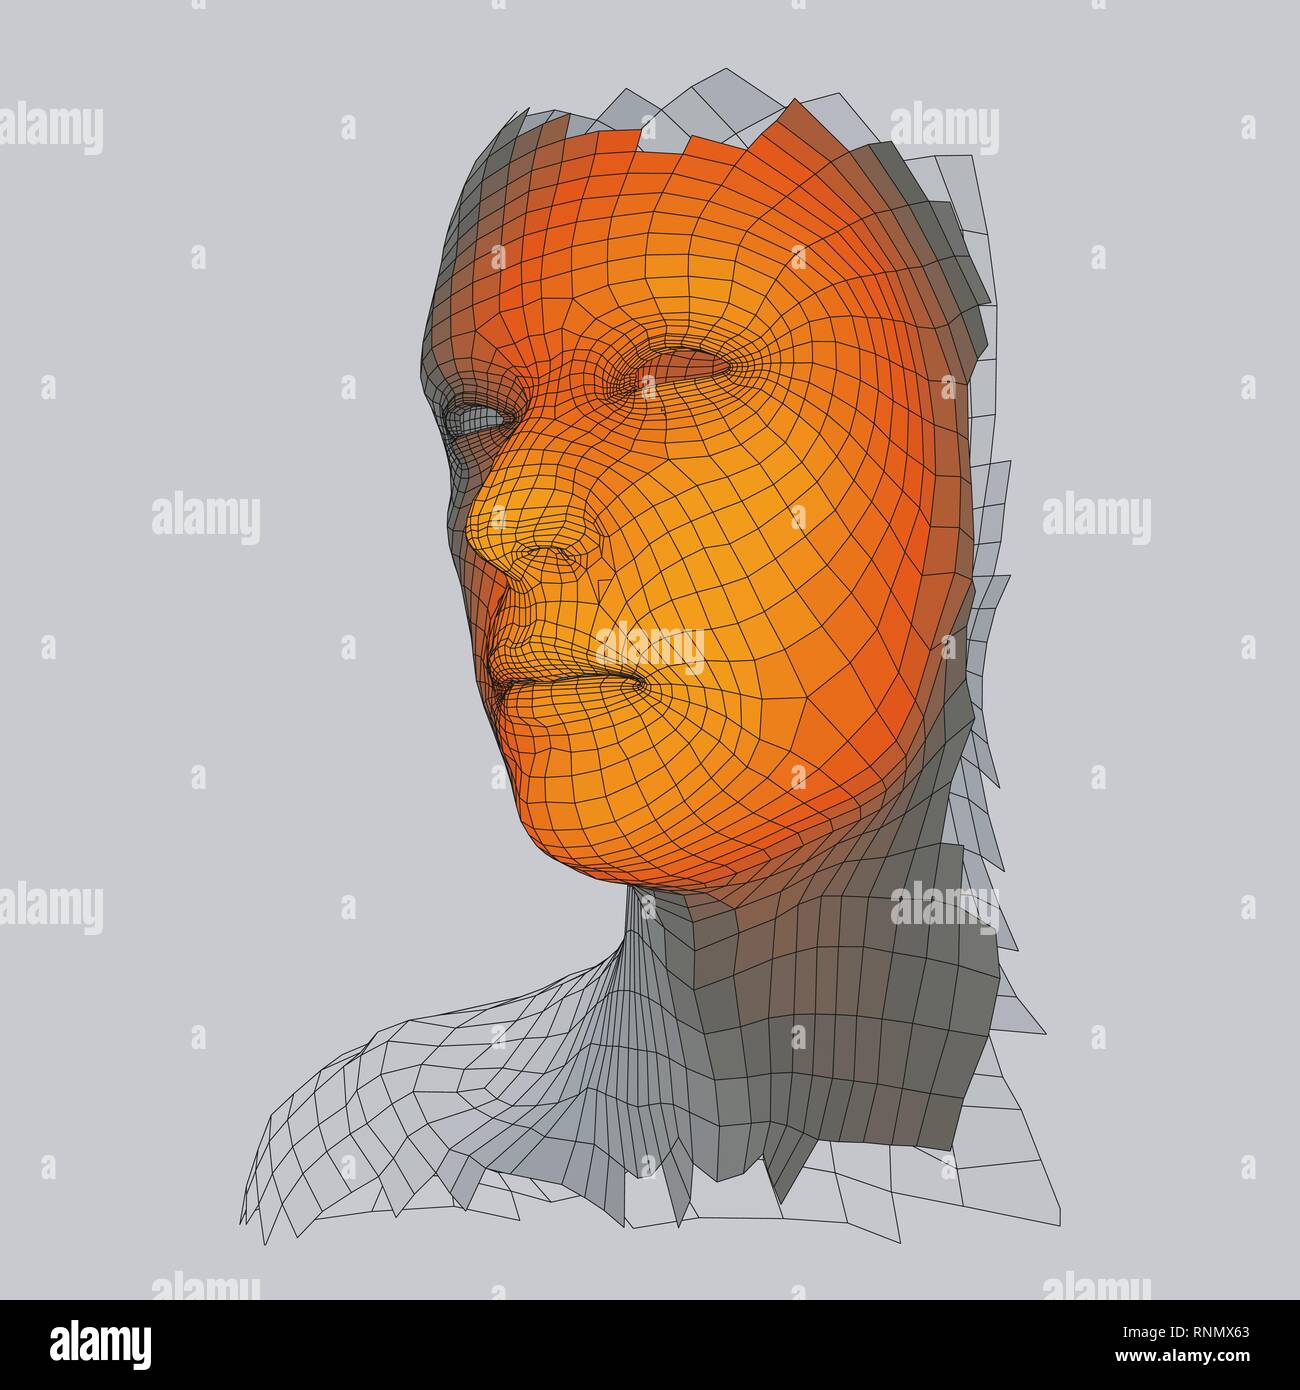 Head of the Person from a 3d Grid. Human Head Wire Model. Face Scanning. View of Human Head. 3D Geometric Face Design. Polygonal Covering Skin. Vector Stock Vector